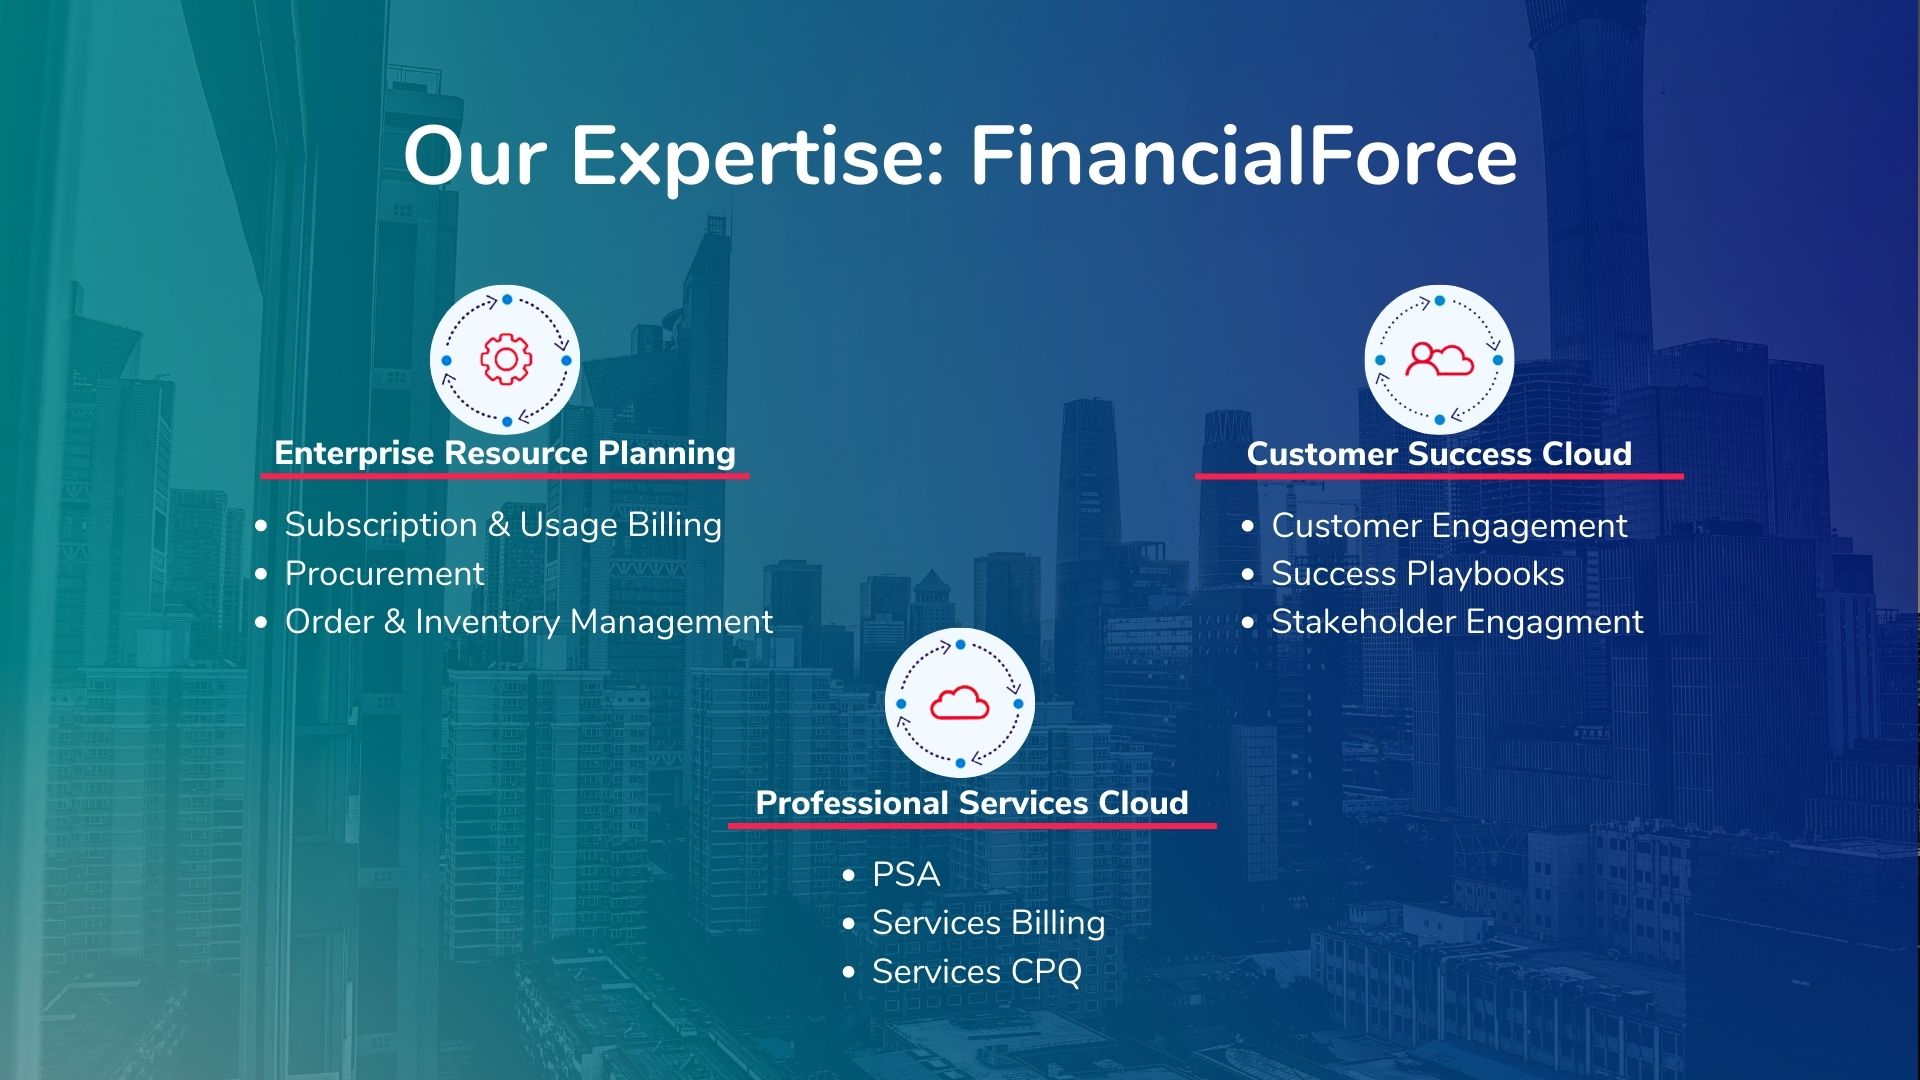 we are 1 of 10 financialforce north american partners